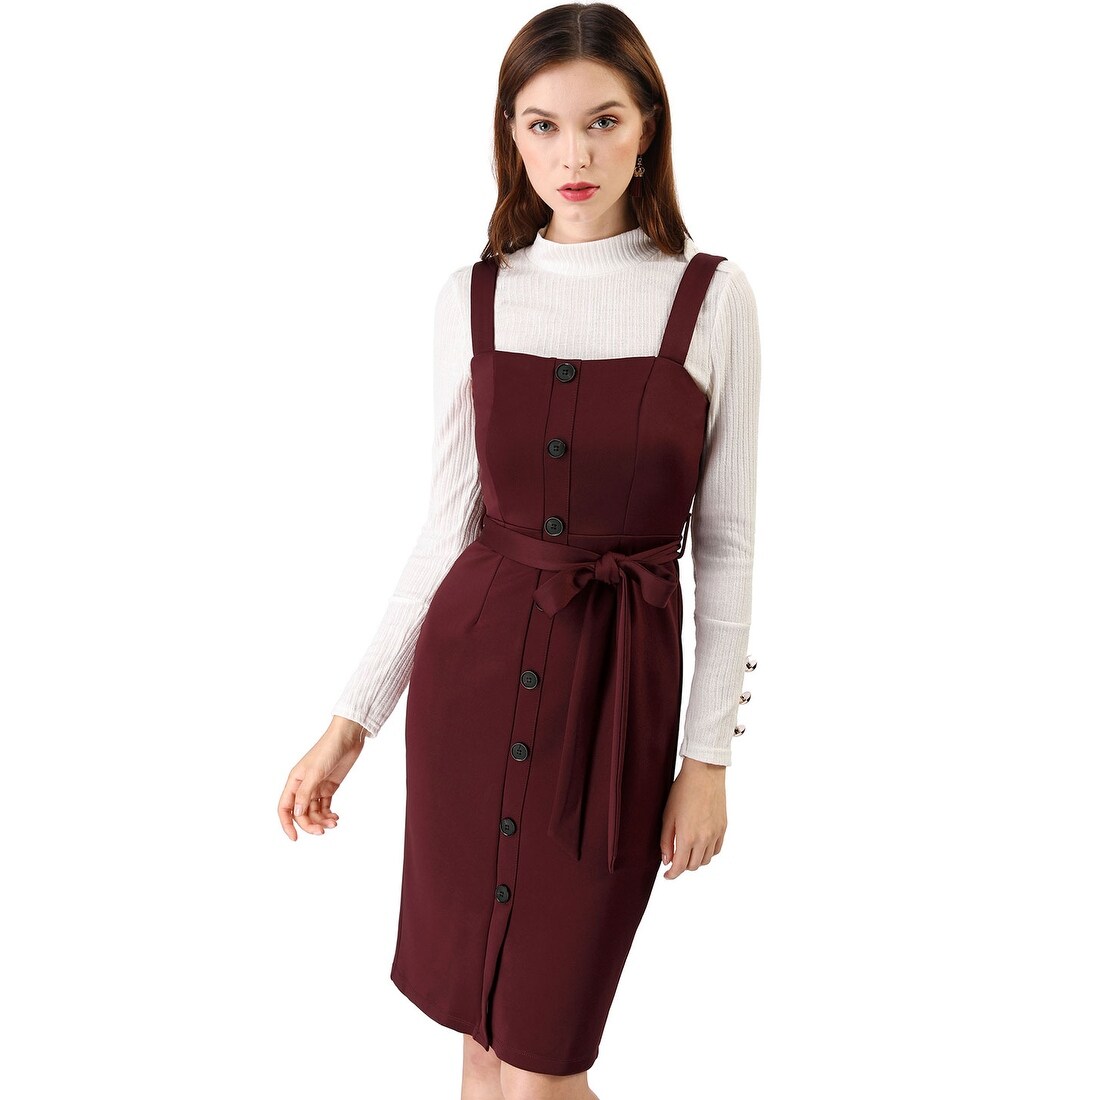 overall formal dress